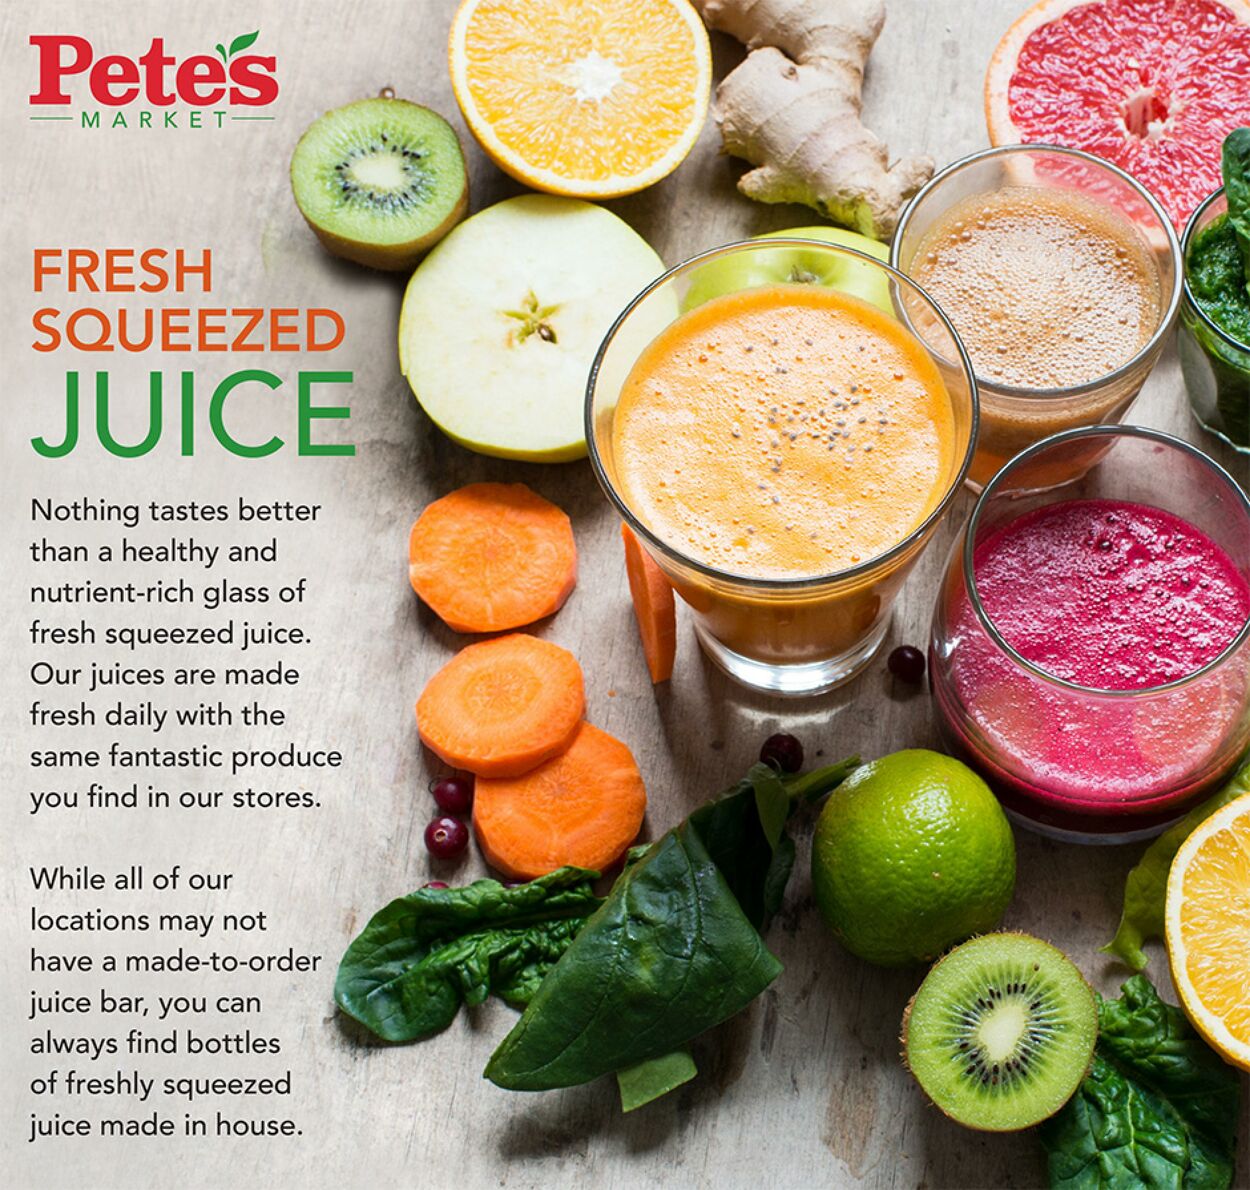 Weekly ad Pete's Fresh Market 02/22/2023 - 02/28/2023